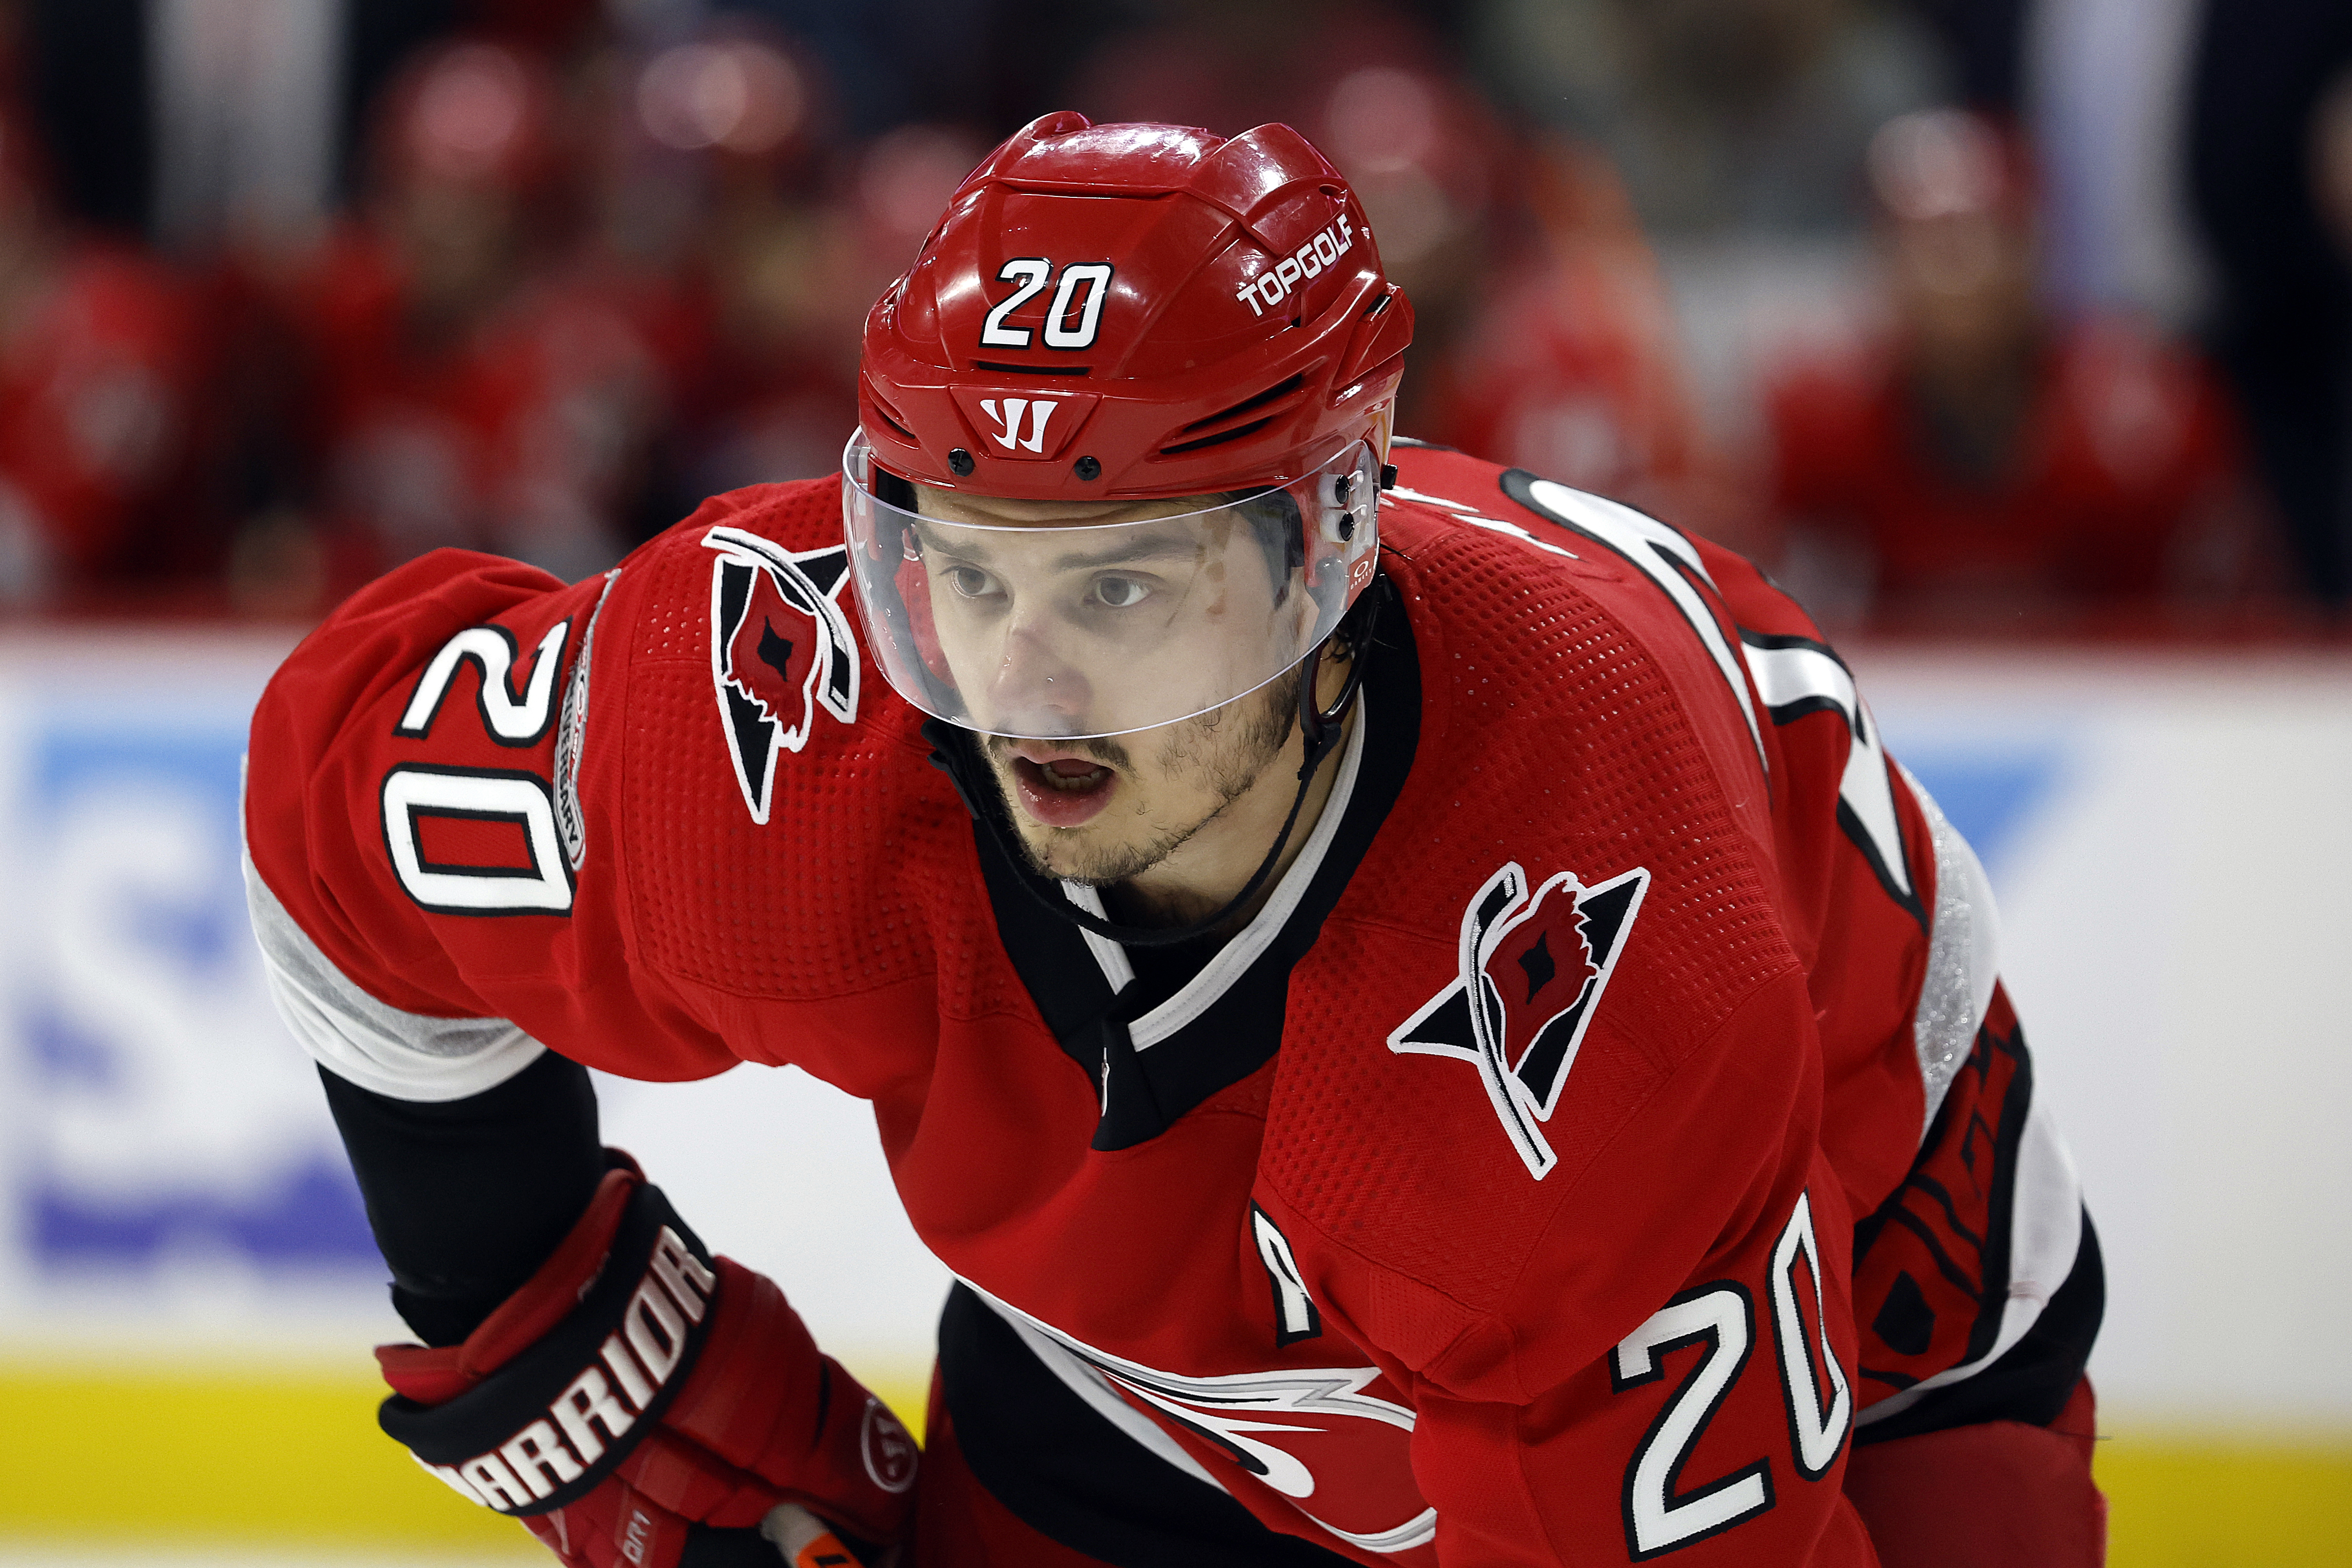 Offensive Hockey: Working Up, With Sebastian Aho